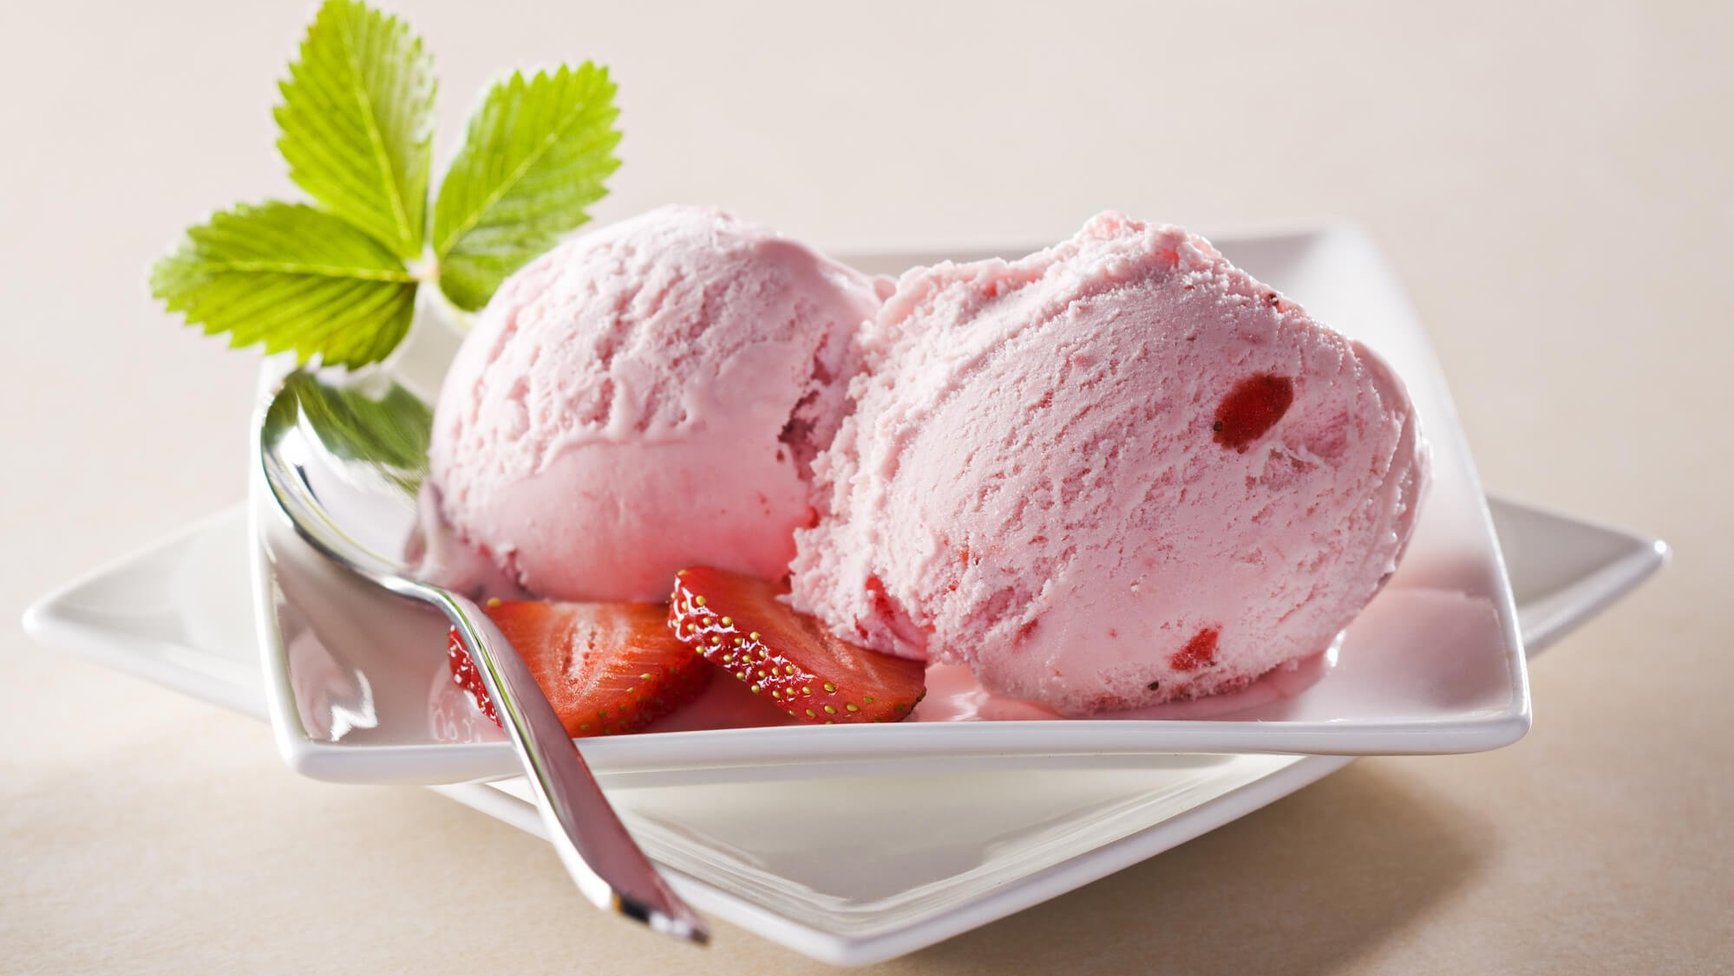 Strawberry Ice Cream Day (15th January) Days Of The Year